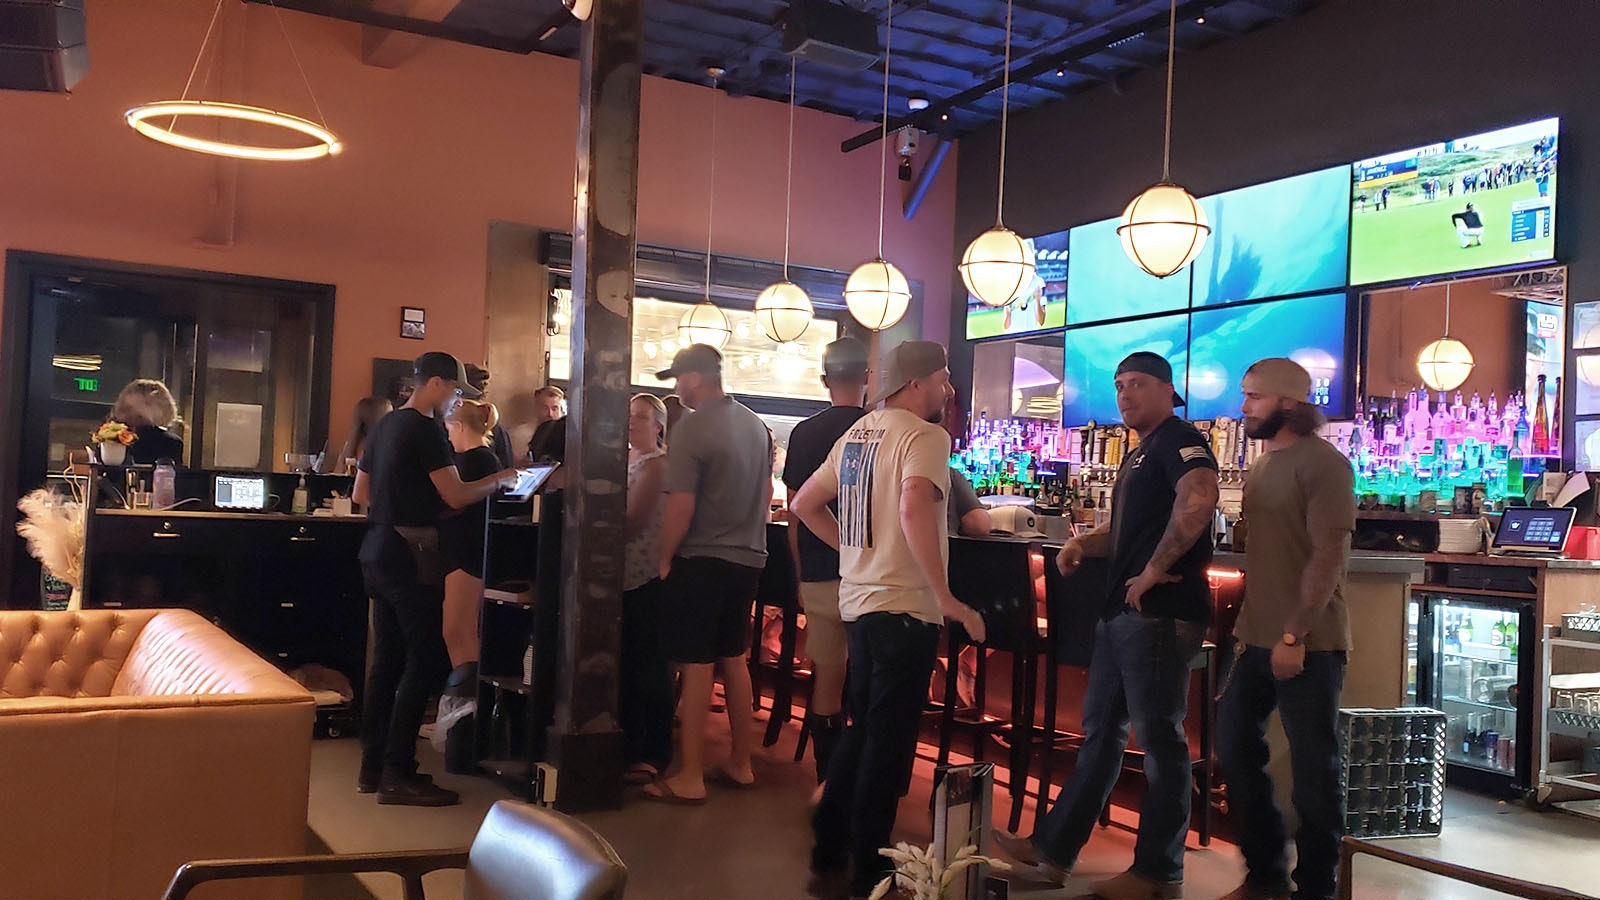 The Gastropub Warehouse in Sheridan has quickly become a favorite local gathering spot.